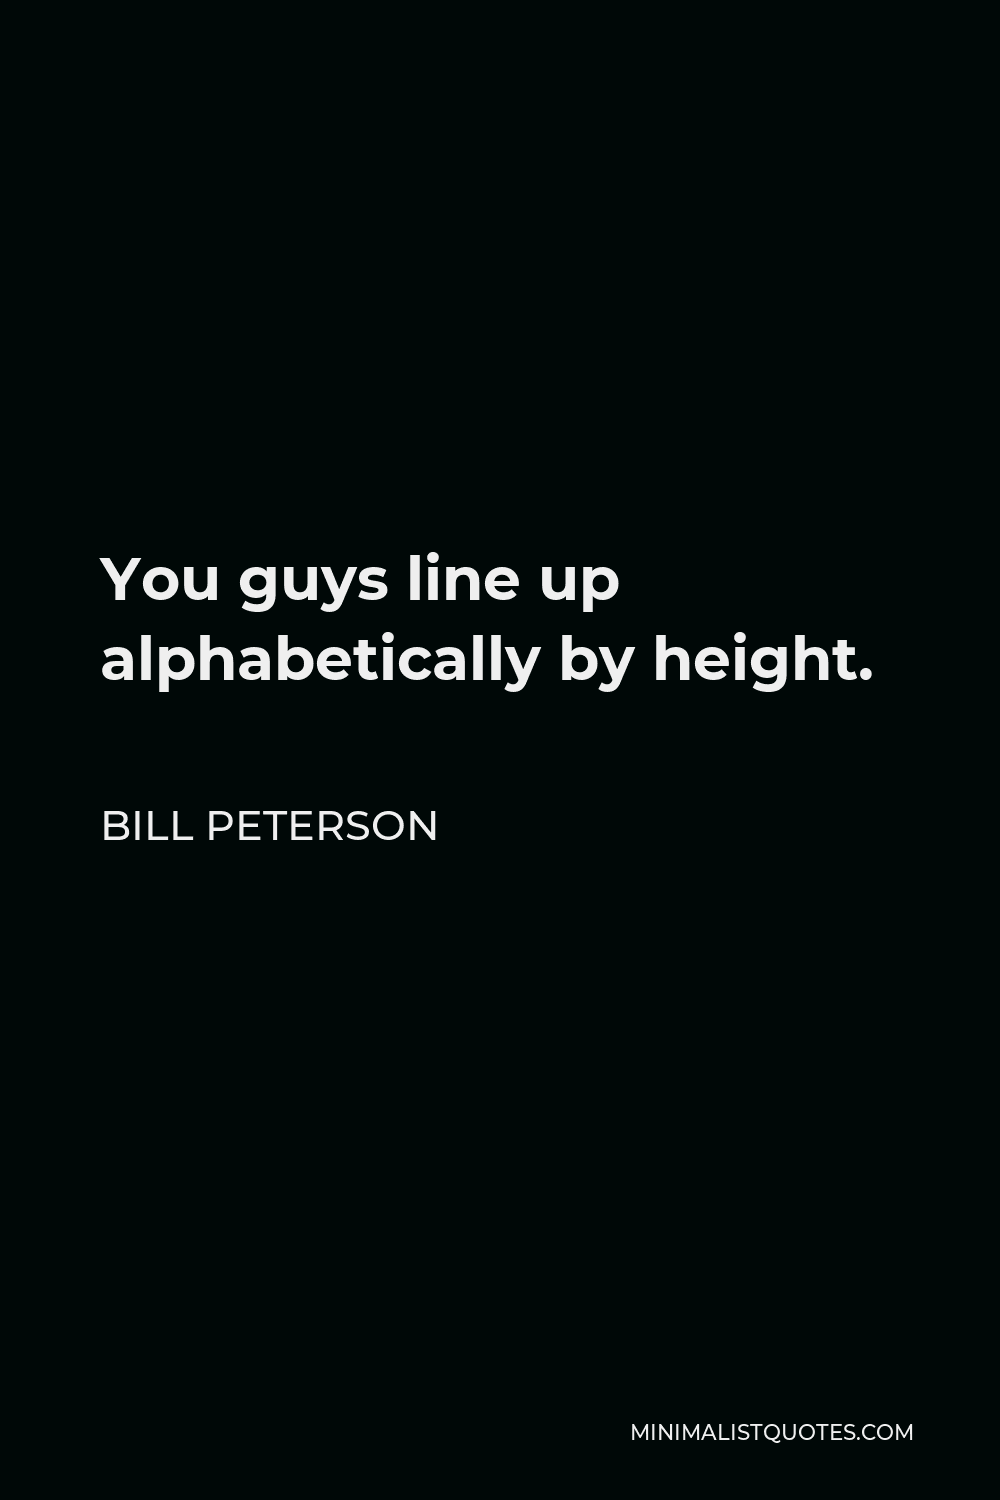 Bill Peterson Quote - You guys line up alphabetically by height.